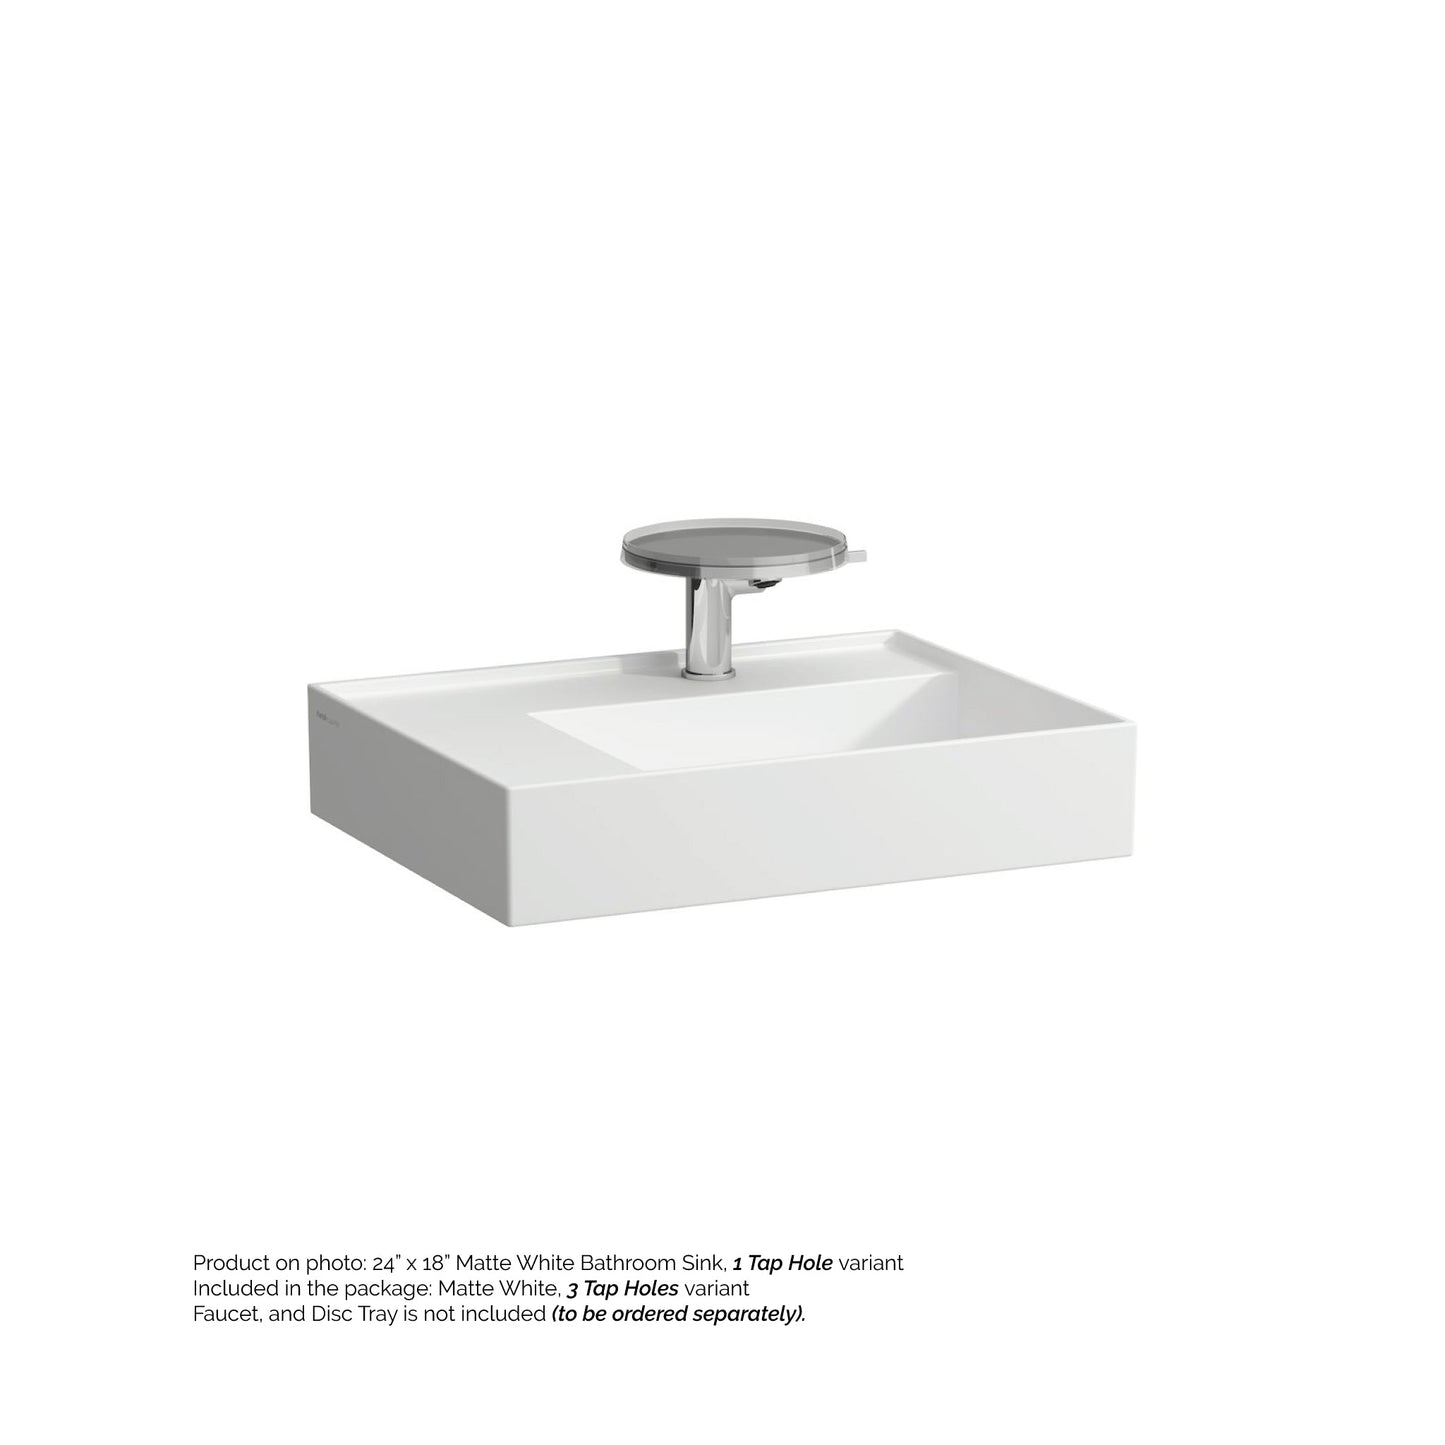 Laufen Kartell 24" x 18" Matte White Wall-Mounted Shelf-Left Bathroom Sink With 3 Faucet Holes